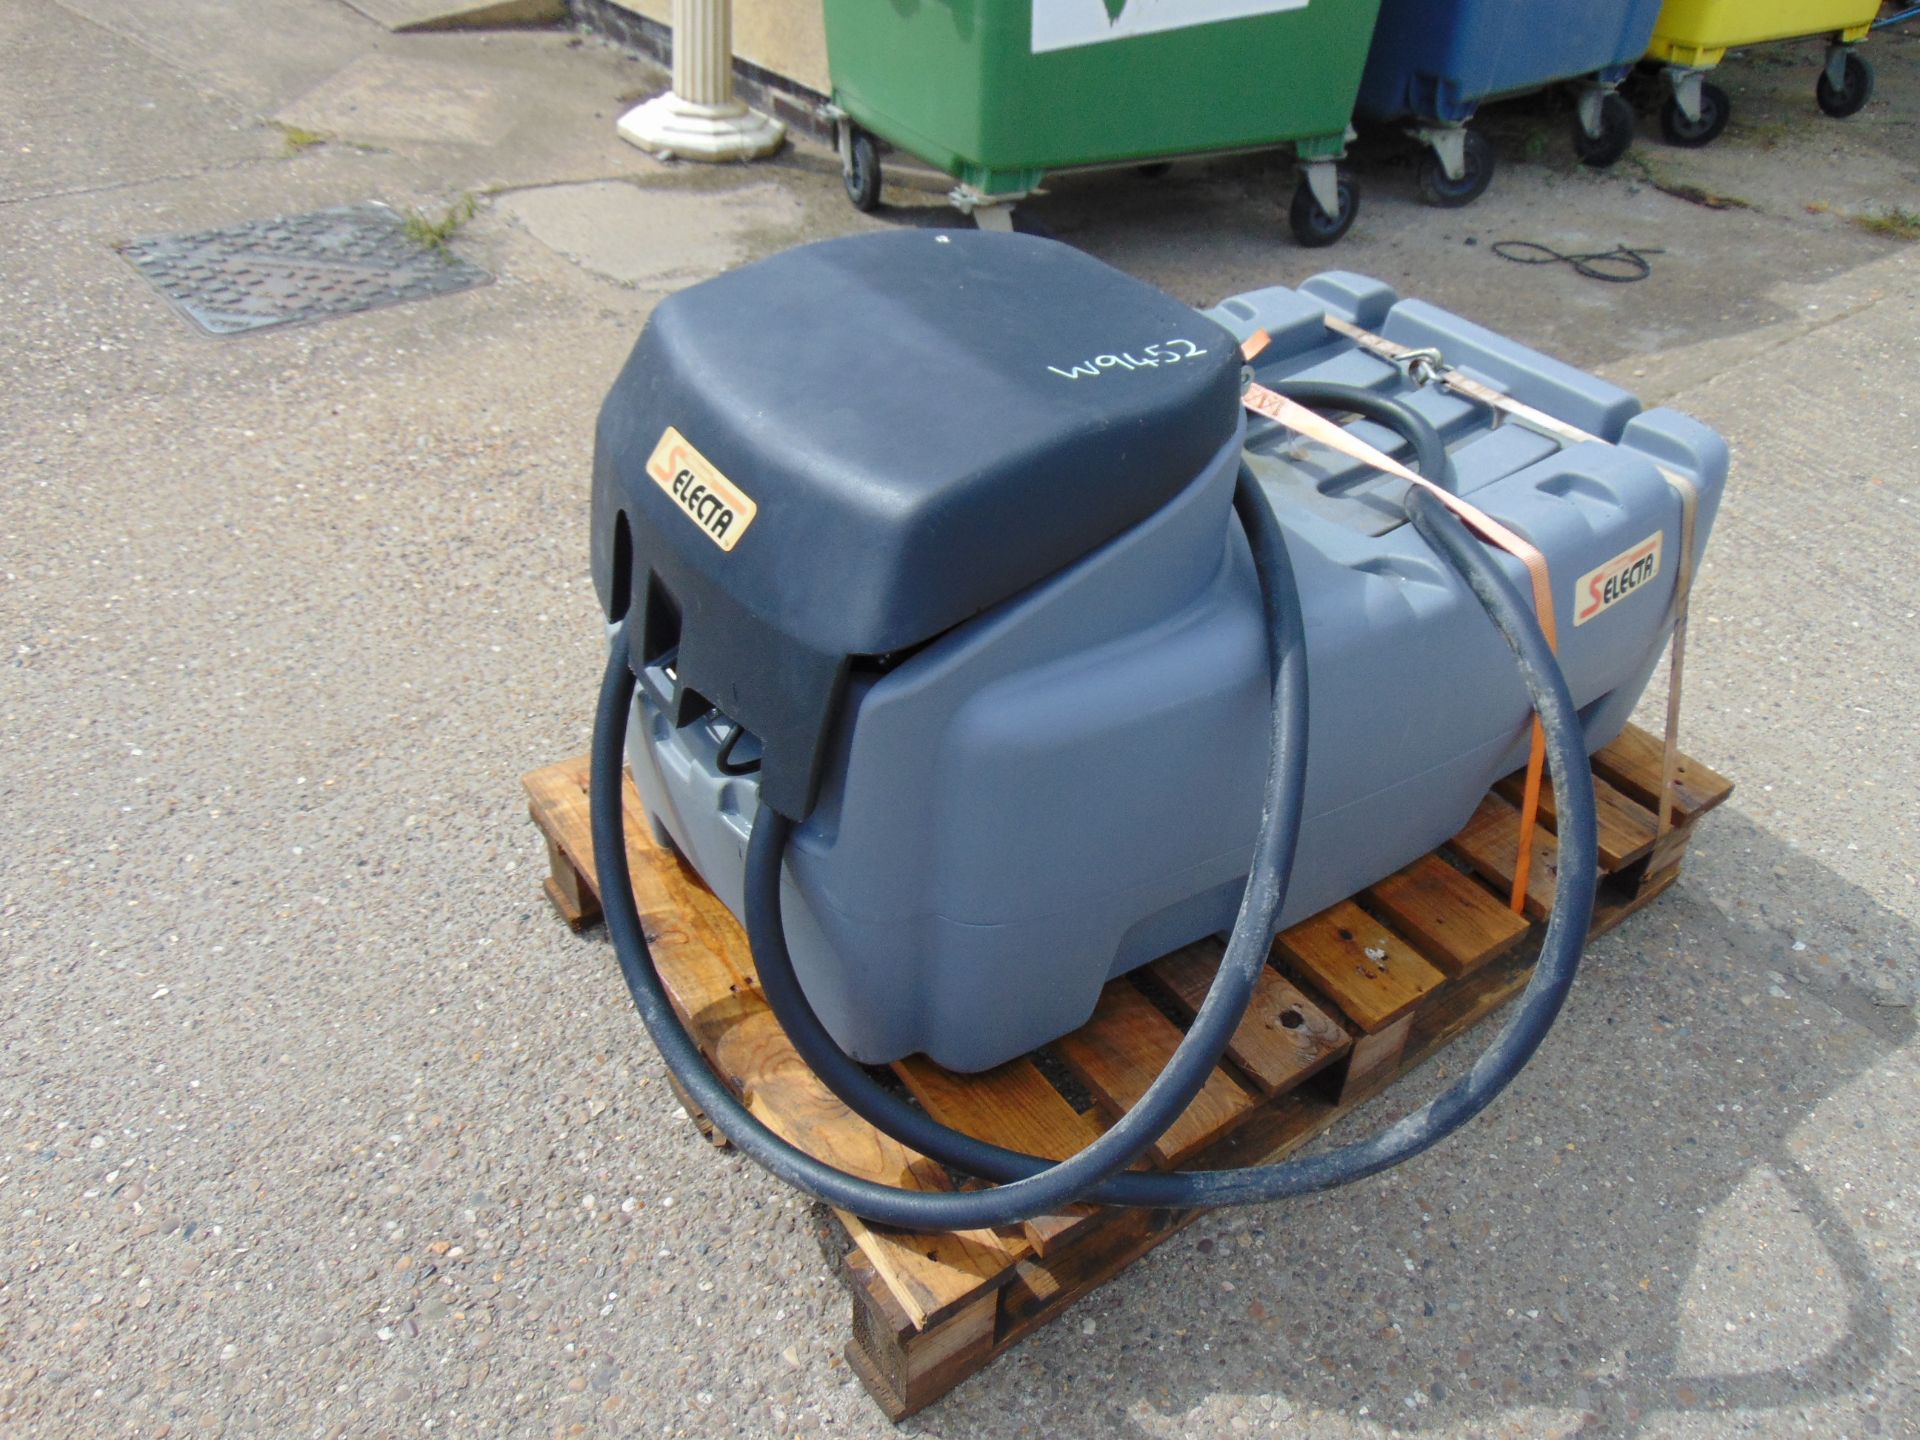 Selecta 200 Litre 50 Gall Portable Refuel Tank c/w 12Volt Pump Hose and Automatic Refuelling Nozzle - Image 13 of 14